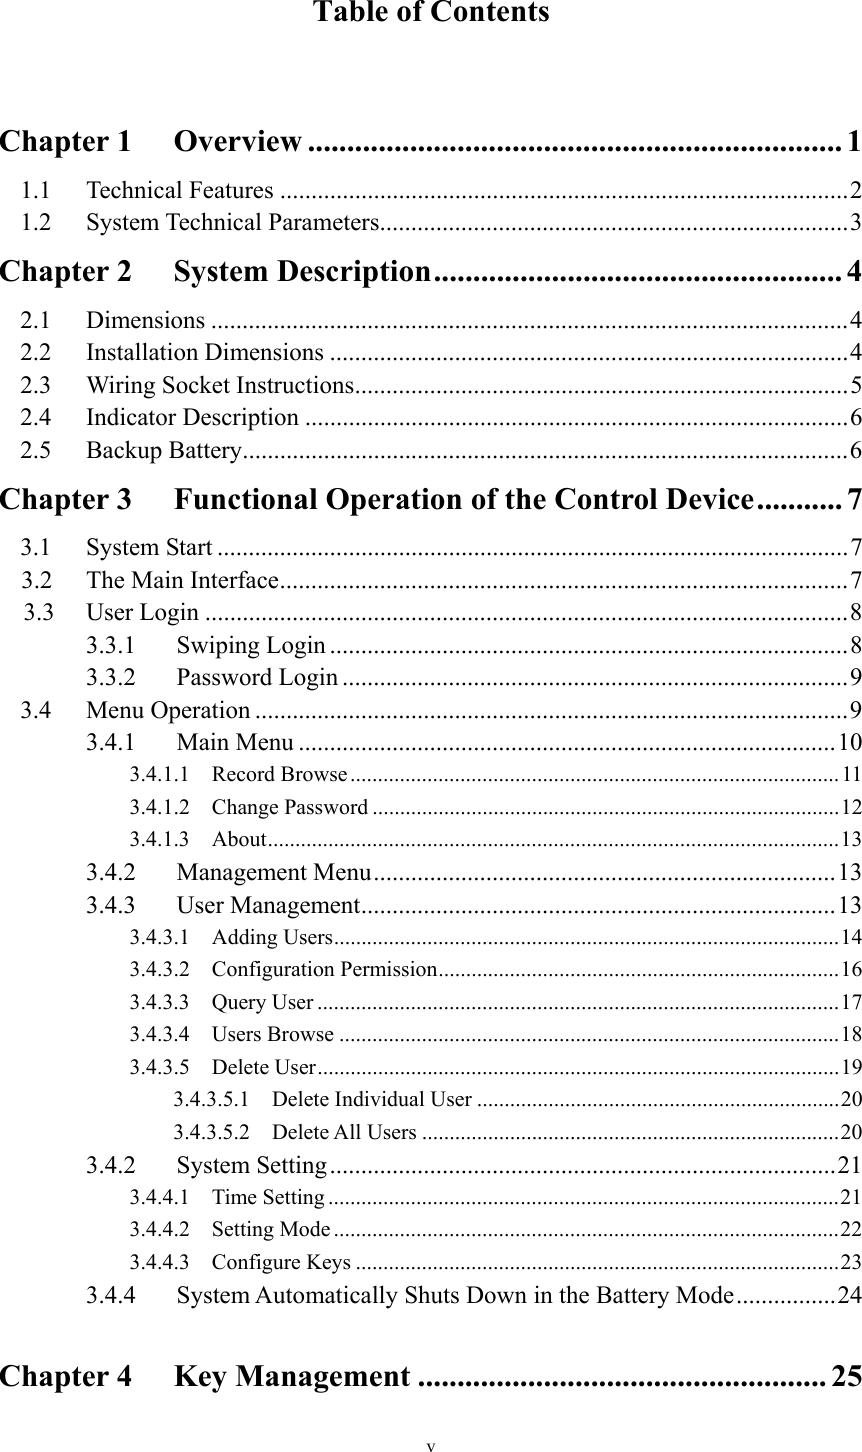 v  Table of Contents    Chapter 1 Overview .................................................................... 1 1.1 Technical Features ........................................................................................... 2 1.2 System Technical Parameters ........................................................................... 3 Chapter 2 System Description .................................................... 4 2.1 Dimensions ...................................................................................................... 4 2.2 Installation Dimensions ................................................................................... 4 2.3 Wiring Socket Instructions ............................................................................... 5 2.4 Indicator Description ....................................................................................... 6 2.5 Backup Battery ................................................................................................. 6 Chapter 3 Functional Operation of the Control Device ........... 7 3.1 System Start ..................................................................................................... 7 3.2 The Main Interface ........................................................................................... 7 3.3 User Login ....................................................................................................... 8 3.3.1 Swiping Login ................................................................................... 8 3.3.2 Password Login ................................................................................. 9 3.4 Menu Operation ............................................................................................... 9 3.4.1 Main Menu ...................................................................................... 10 3.4.1.1 Record Browse ......................................................................................... 11 3.4.1.2 Change Password ..................................................................................... 12 3.4.1.3 About ........................................................................................................ 13 3.4.2 Management Menu .......................................................................... 13 3.4.3 User Management ............................................................................ 13 3.4.3.1 Adding Users ............................................................................................ 14 3.4.3.2 Configuration Permission ......................................................................... 16 3.4.3.3 Query User ............................................................................................... 17 3.4.3.4 Users Browse ........................................................................................... 18 3.4.3.5  Delete  User ............................................................................................... 19 3.4.3.5.1  Delete Individual User .................................................................. 20 3.4.3.5.2 Delete All Users ............................................................................ 20 3.4.2 System Setting ................................................................................. 21 3.4.4.1 Time Setting ............................................................................................. 21 3.4.4.2 Setting Mode ............................................................................................ 22 3.4.4.3 Configure Keys ........................................................................................ 23 3.4.4 System Automatically Shuts Down in the Battery Mode ................ 24  Chapter 4 Key Management .................................................... 25 